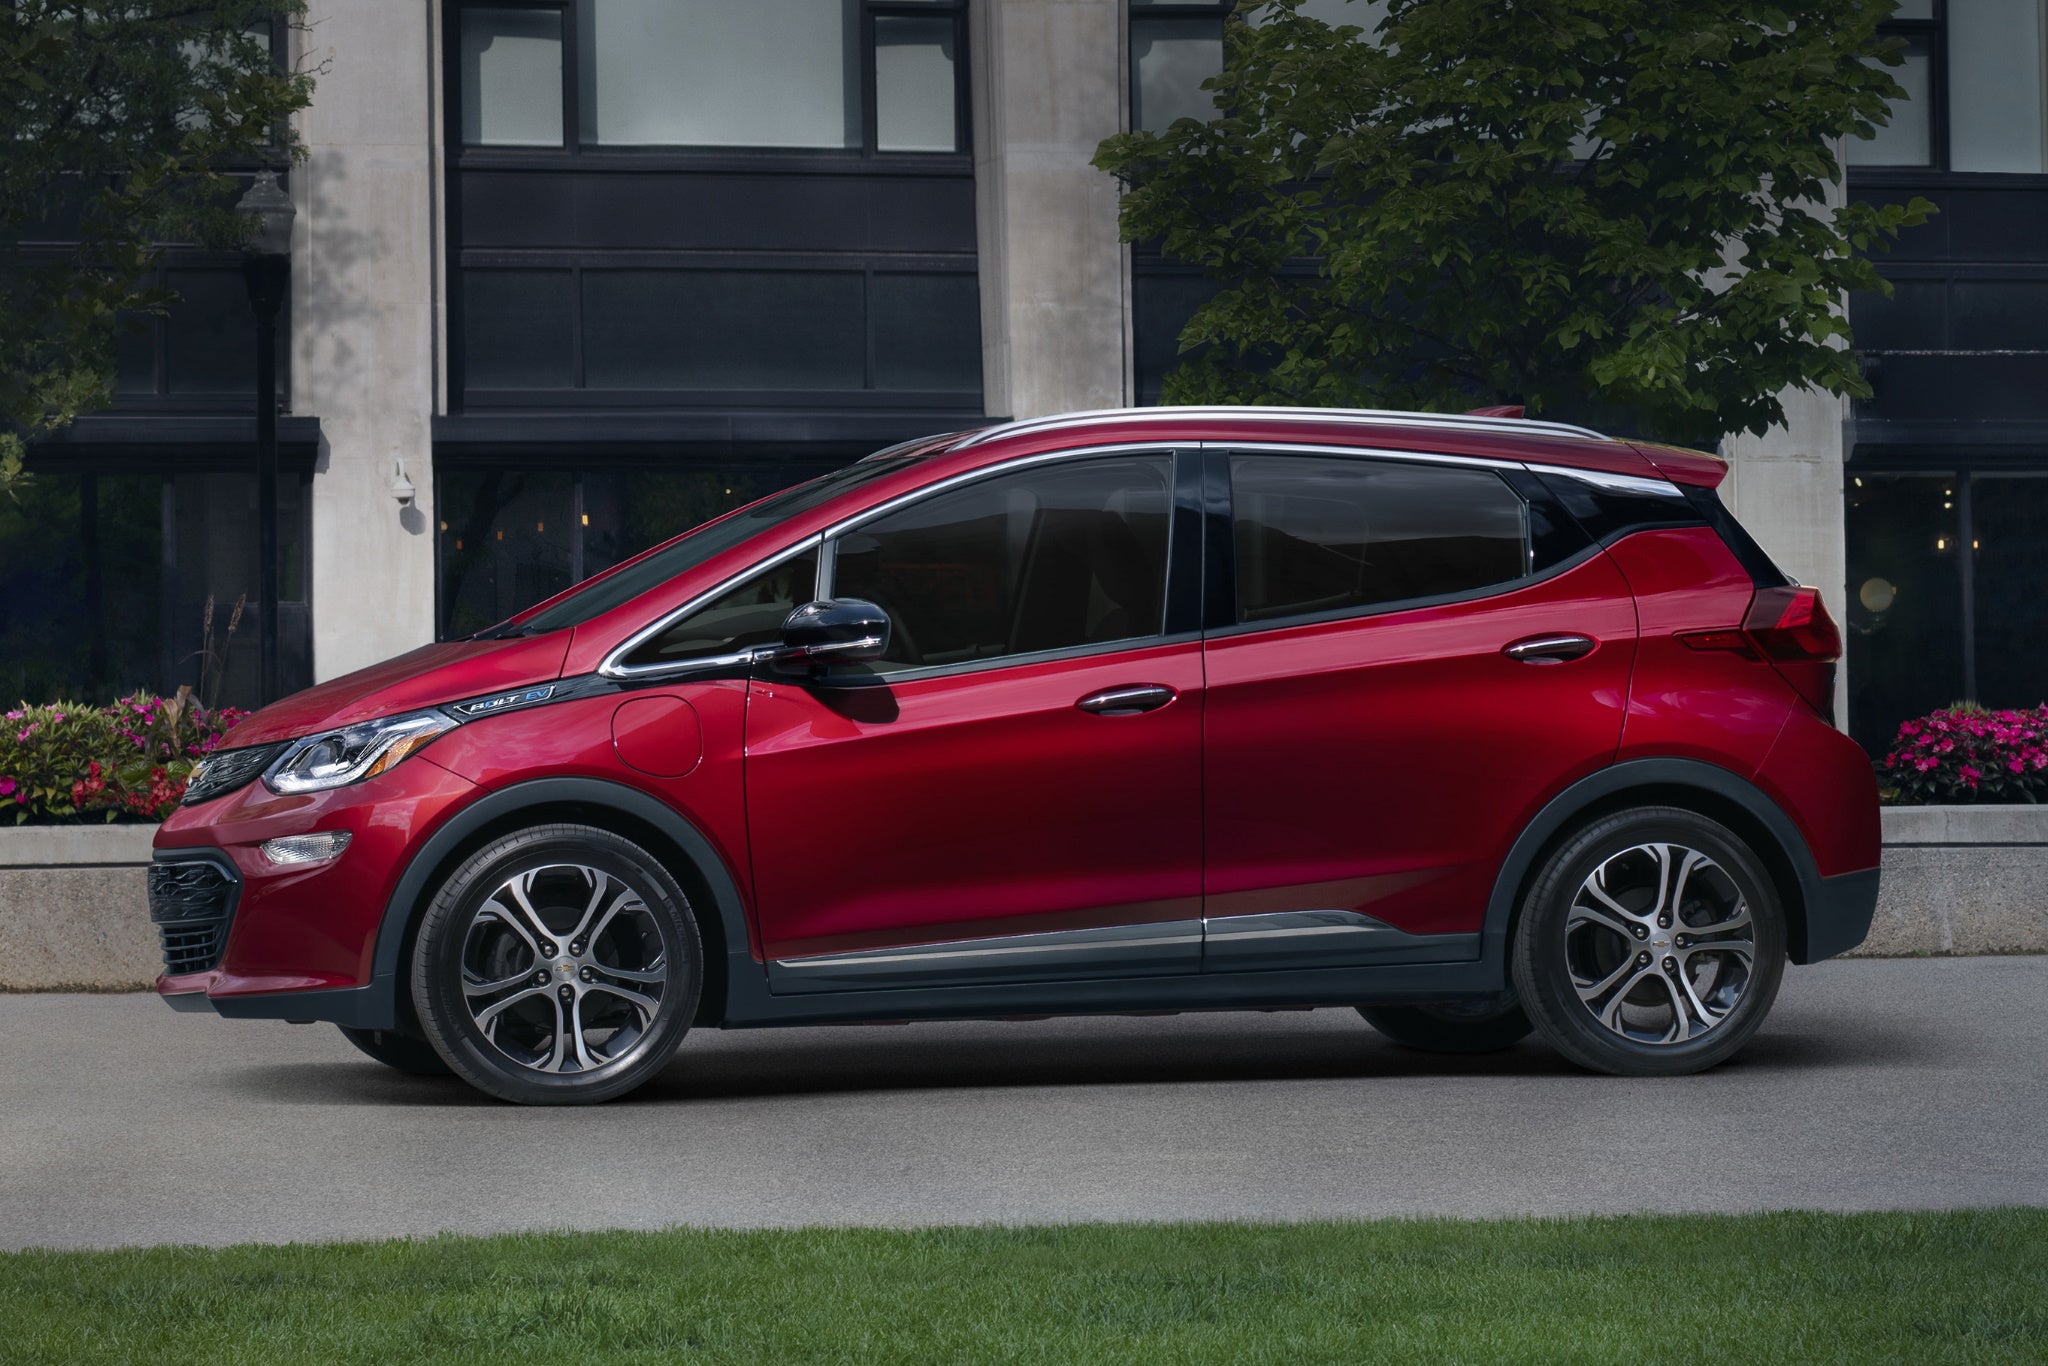 GM Is Buying Back Dozens of Chevy Bolt EVs That Pose Fire Risk Due to 'Rare Manufacturing Defect'